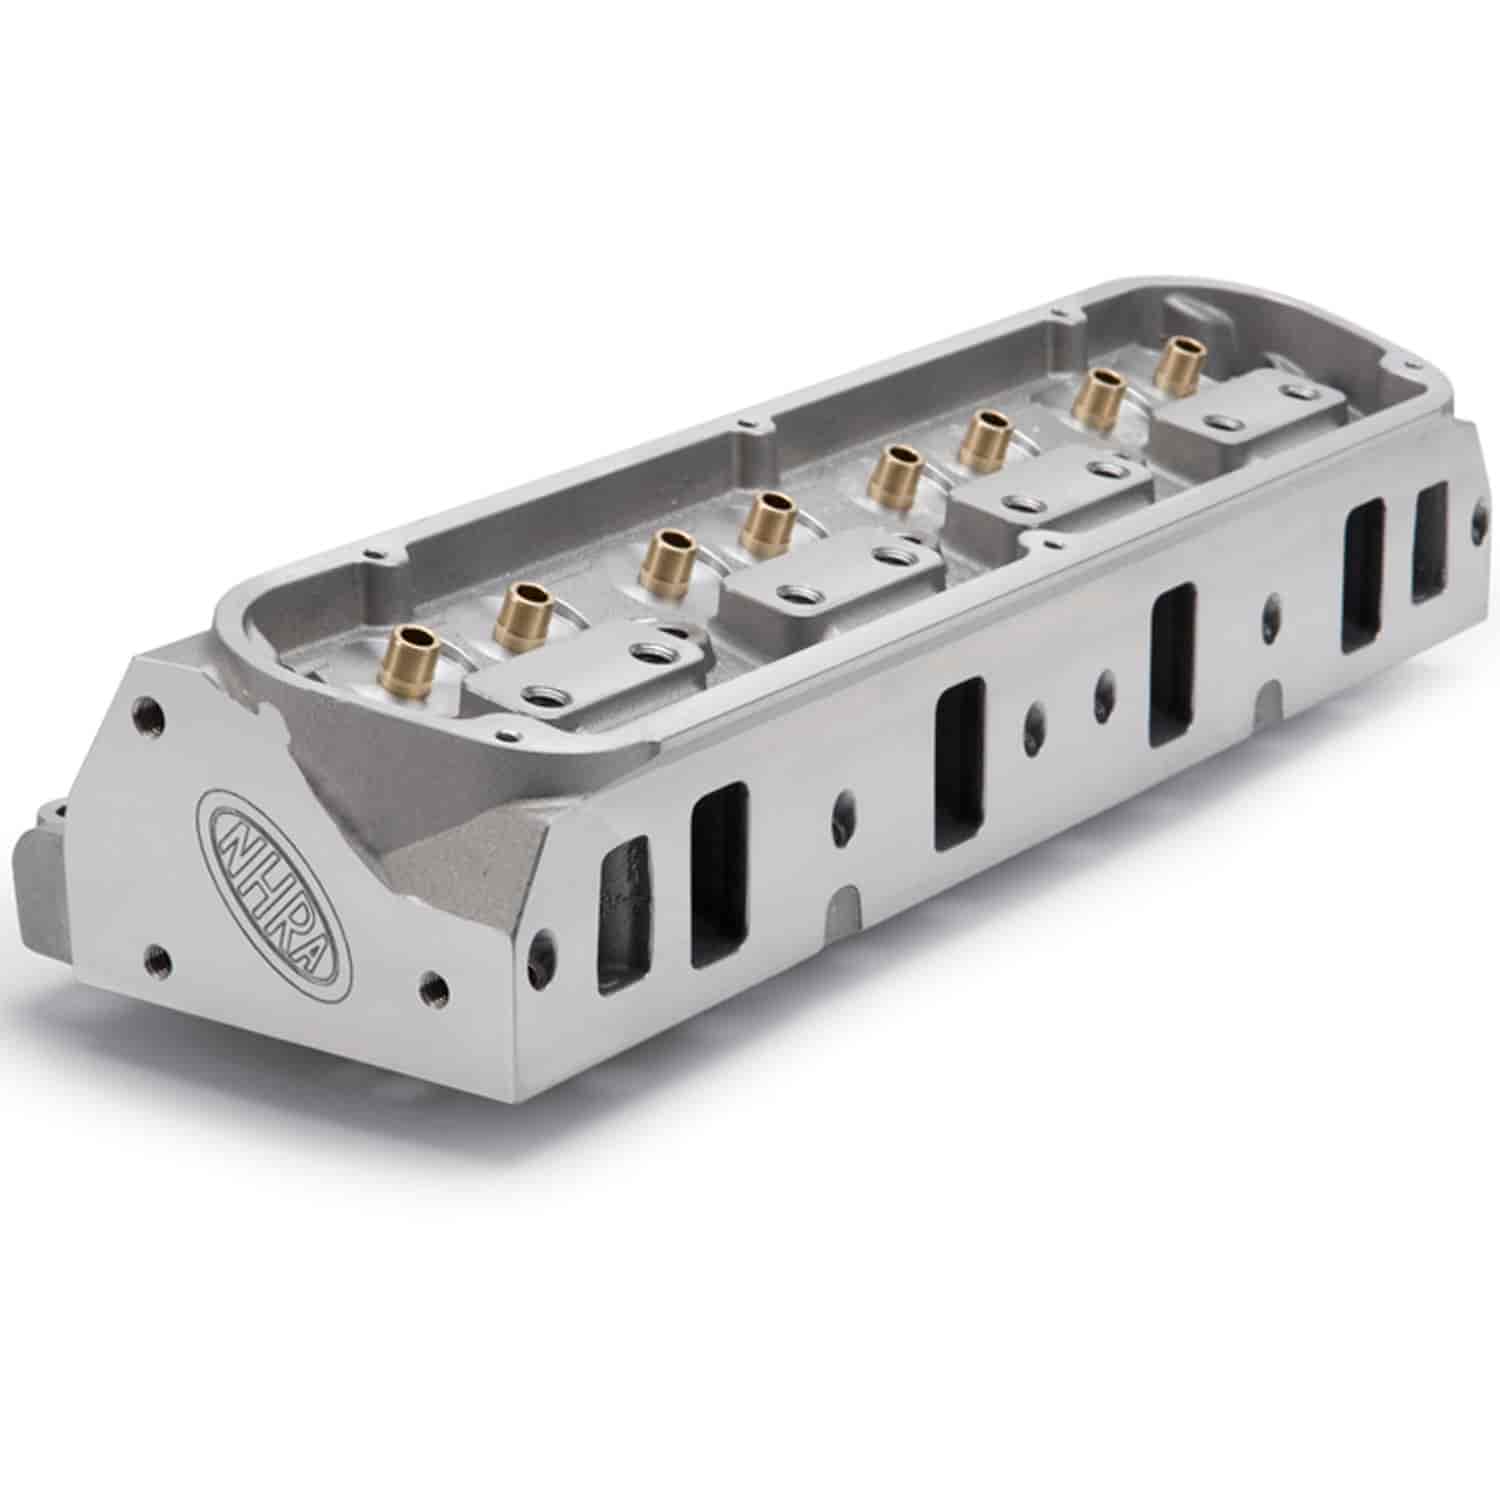 NHRA Performer RPM Cylinder Head for Small Block Ford